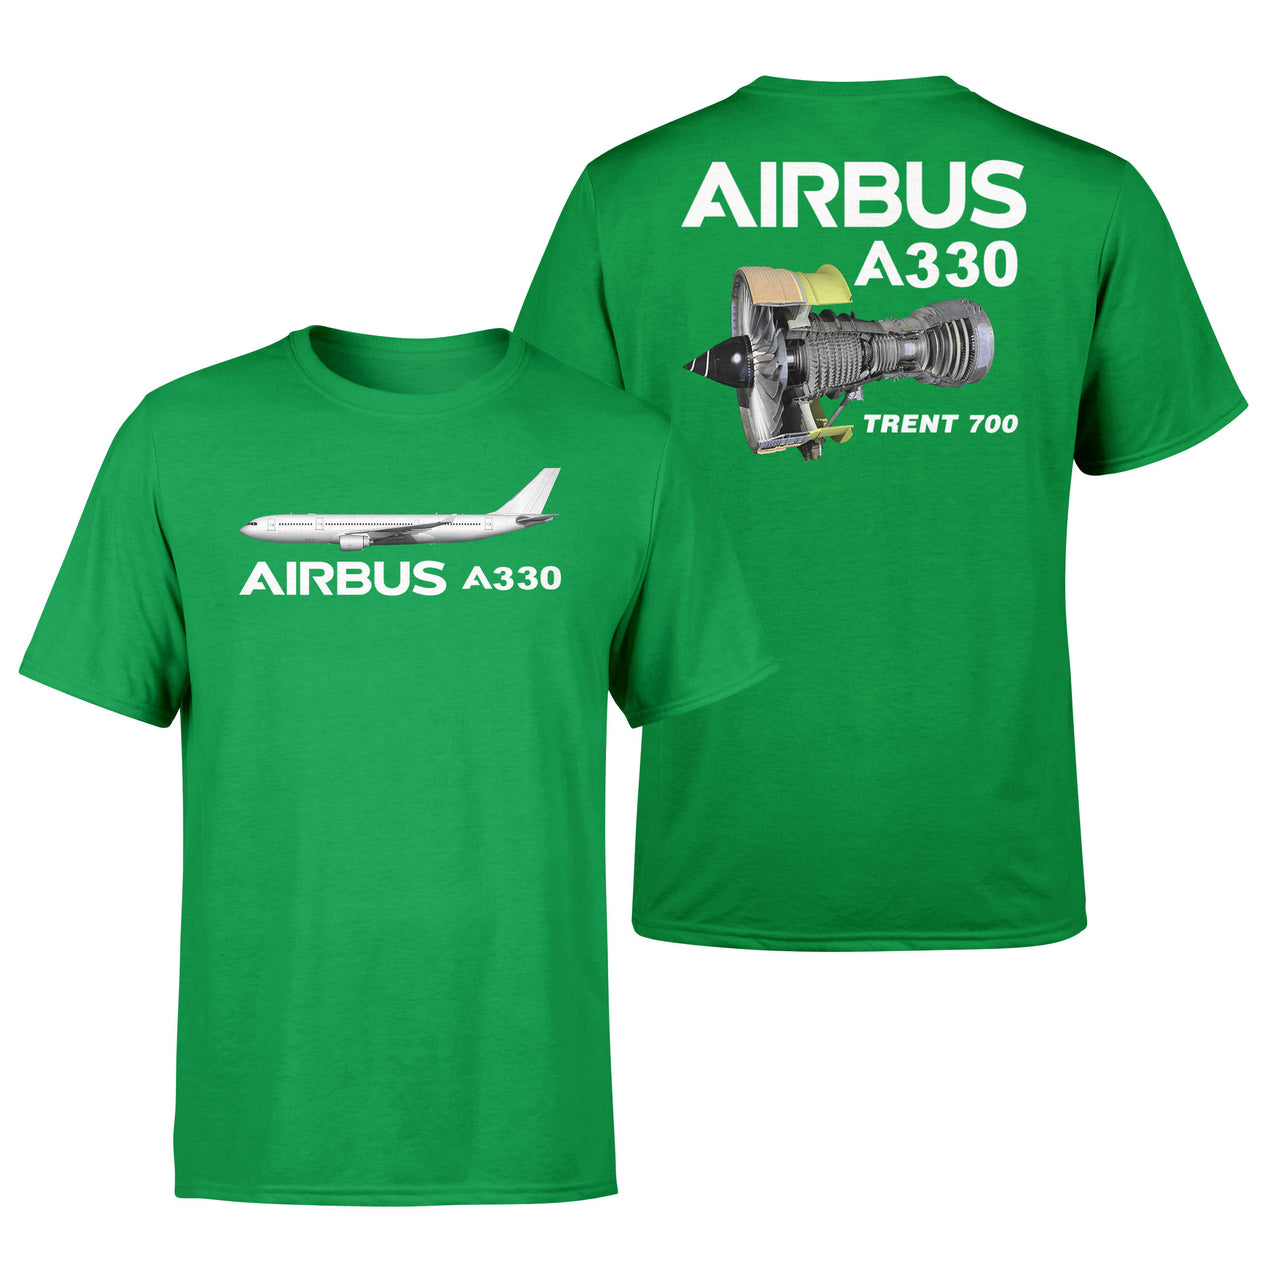 Airbus A330 & Trent 700 Engine Designed Double-Side T-Shirts